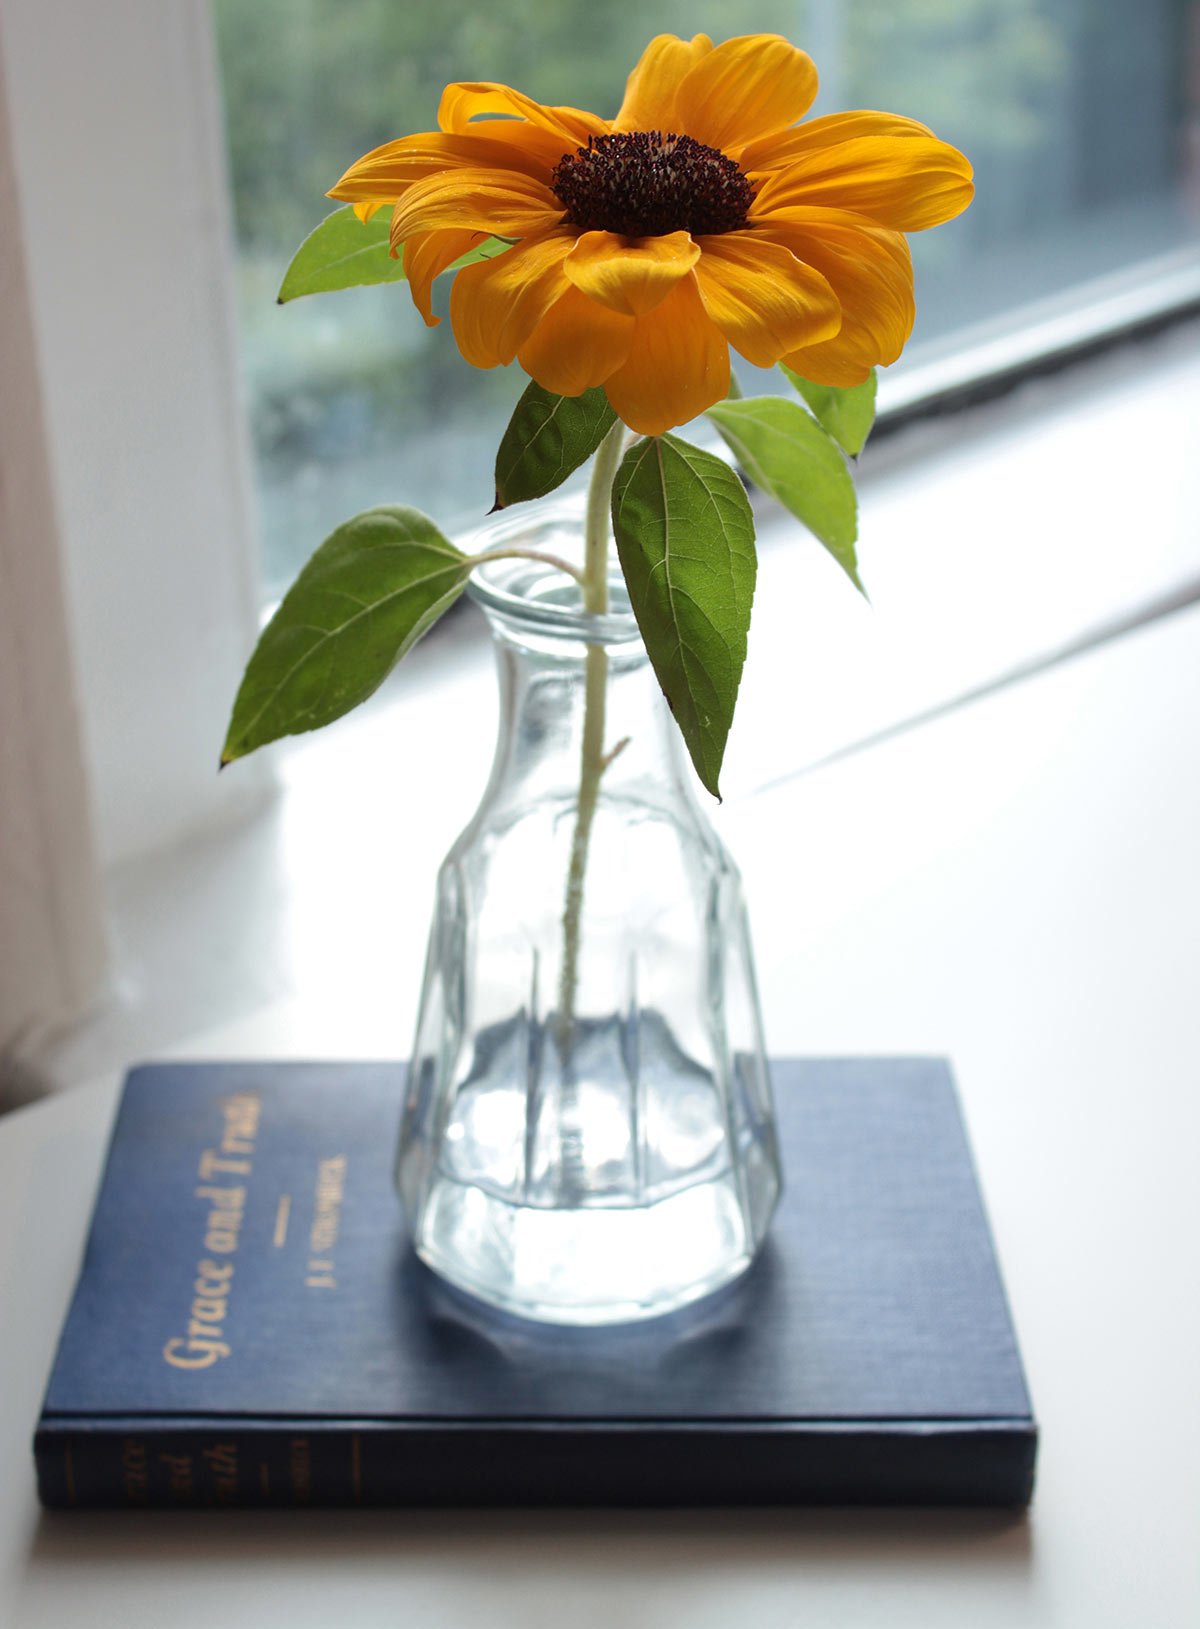 Sunflower in Vintage Salad Dressing Container